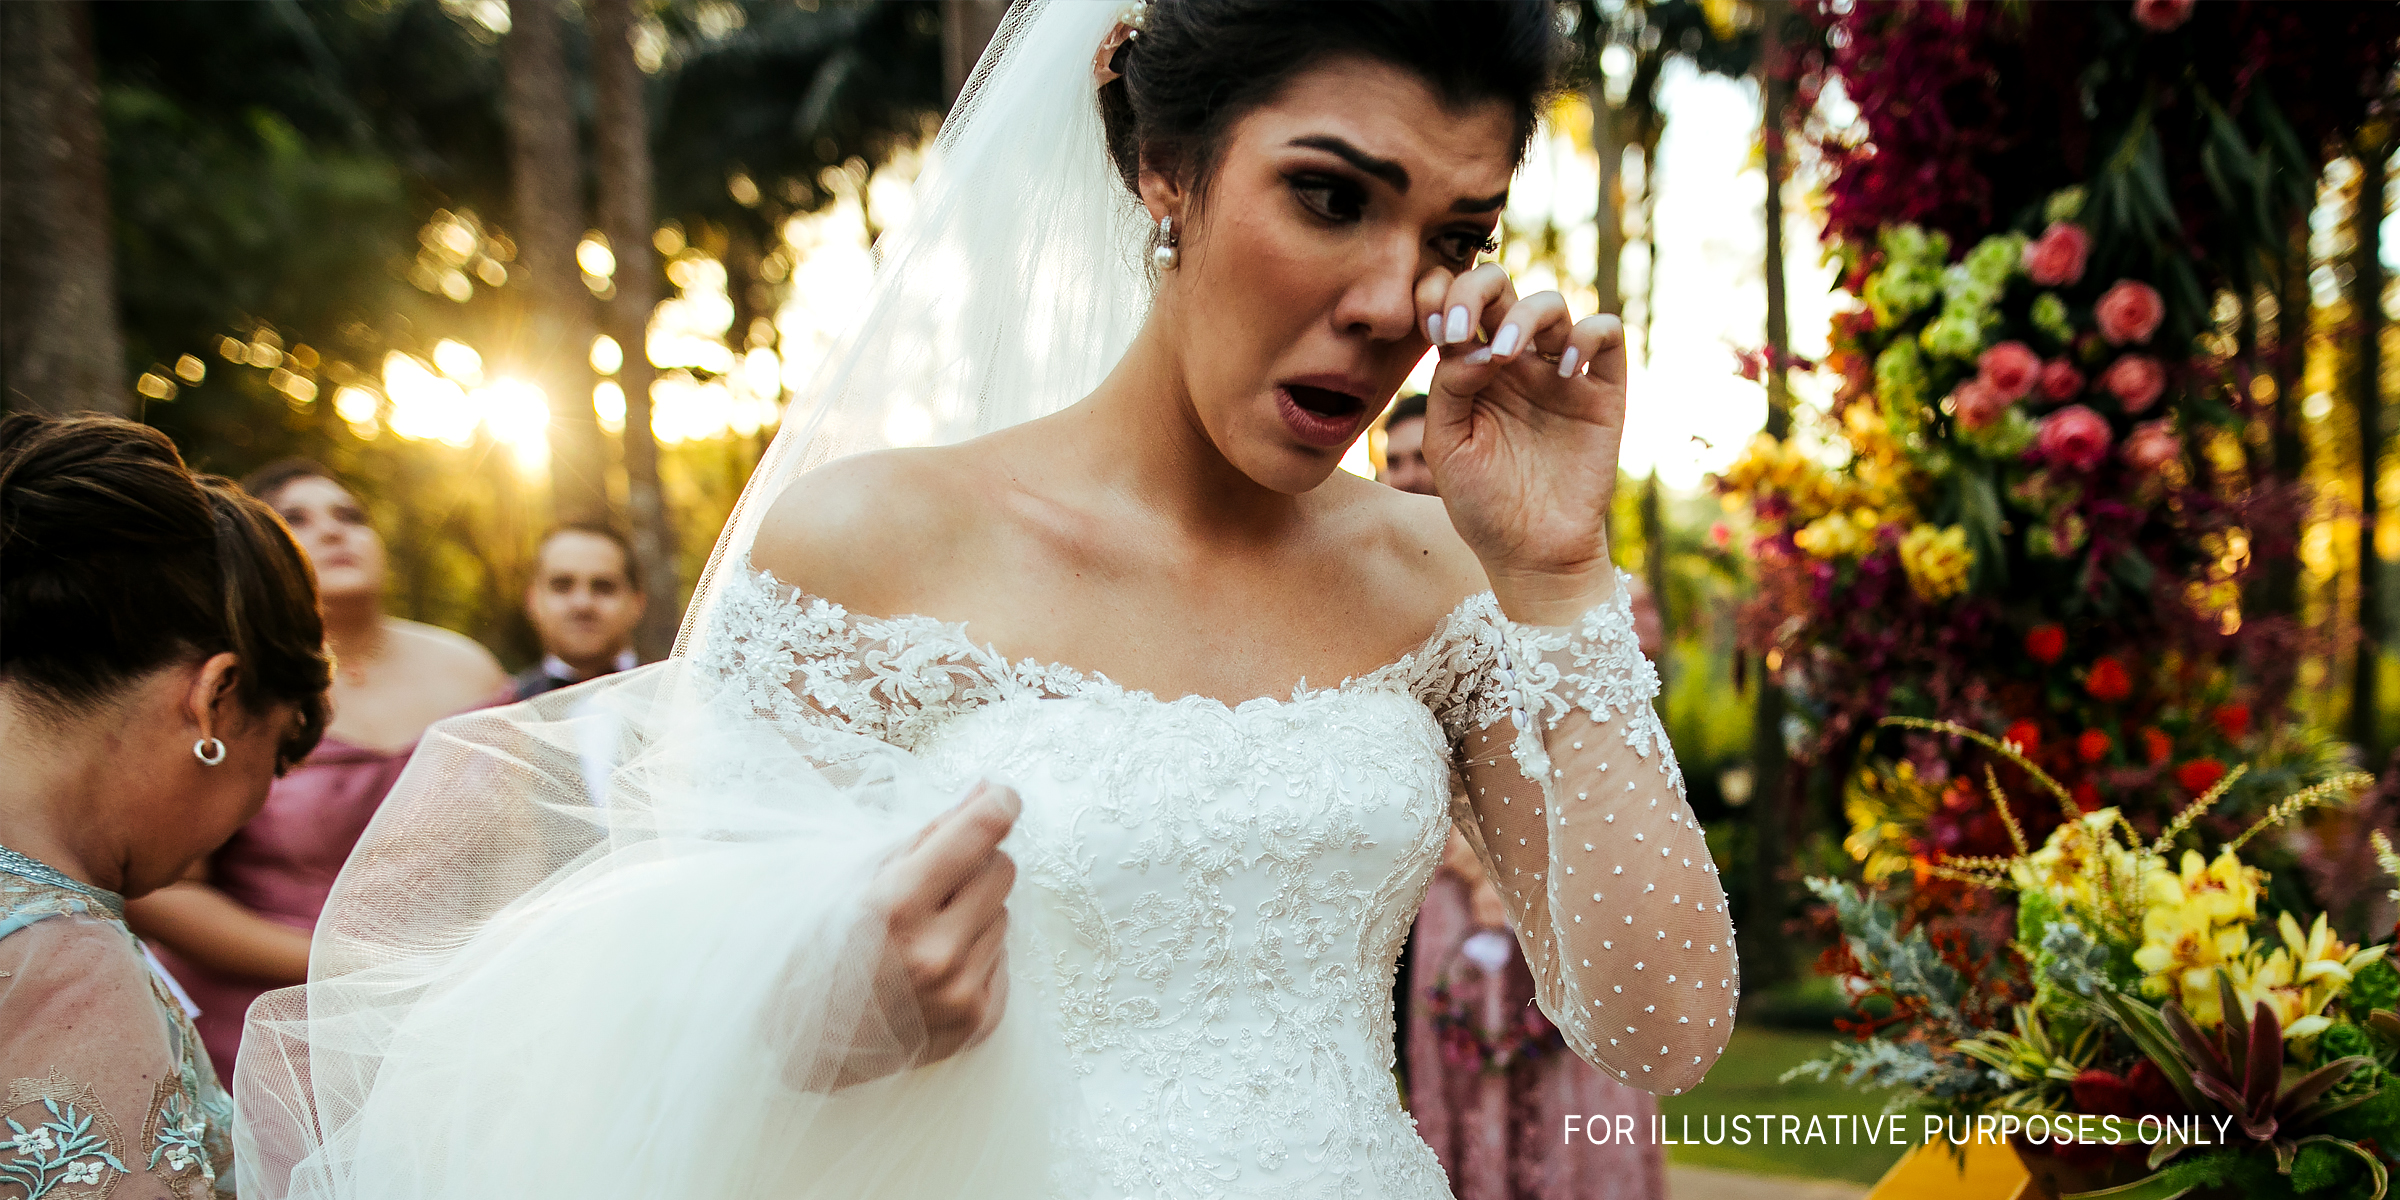 A crying bride at the altar | Source: Getty Images